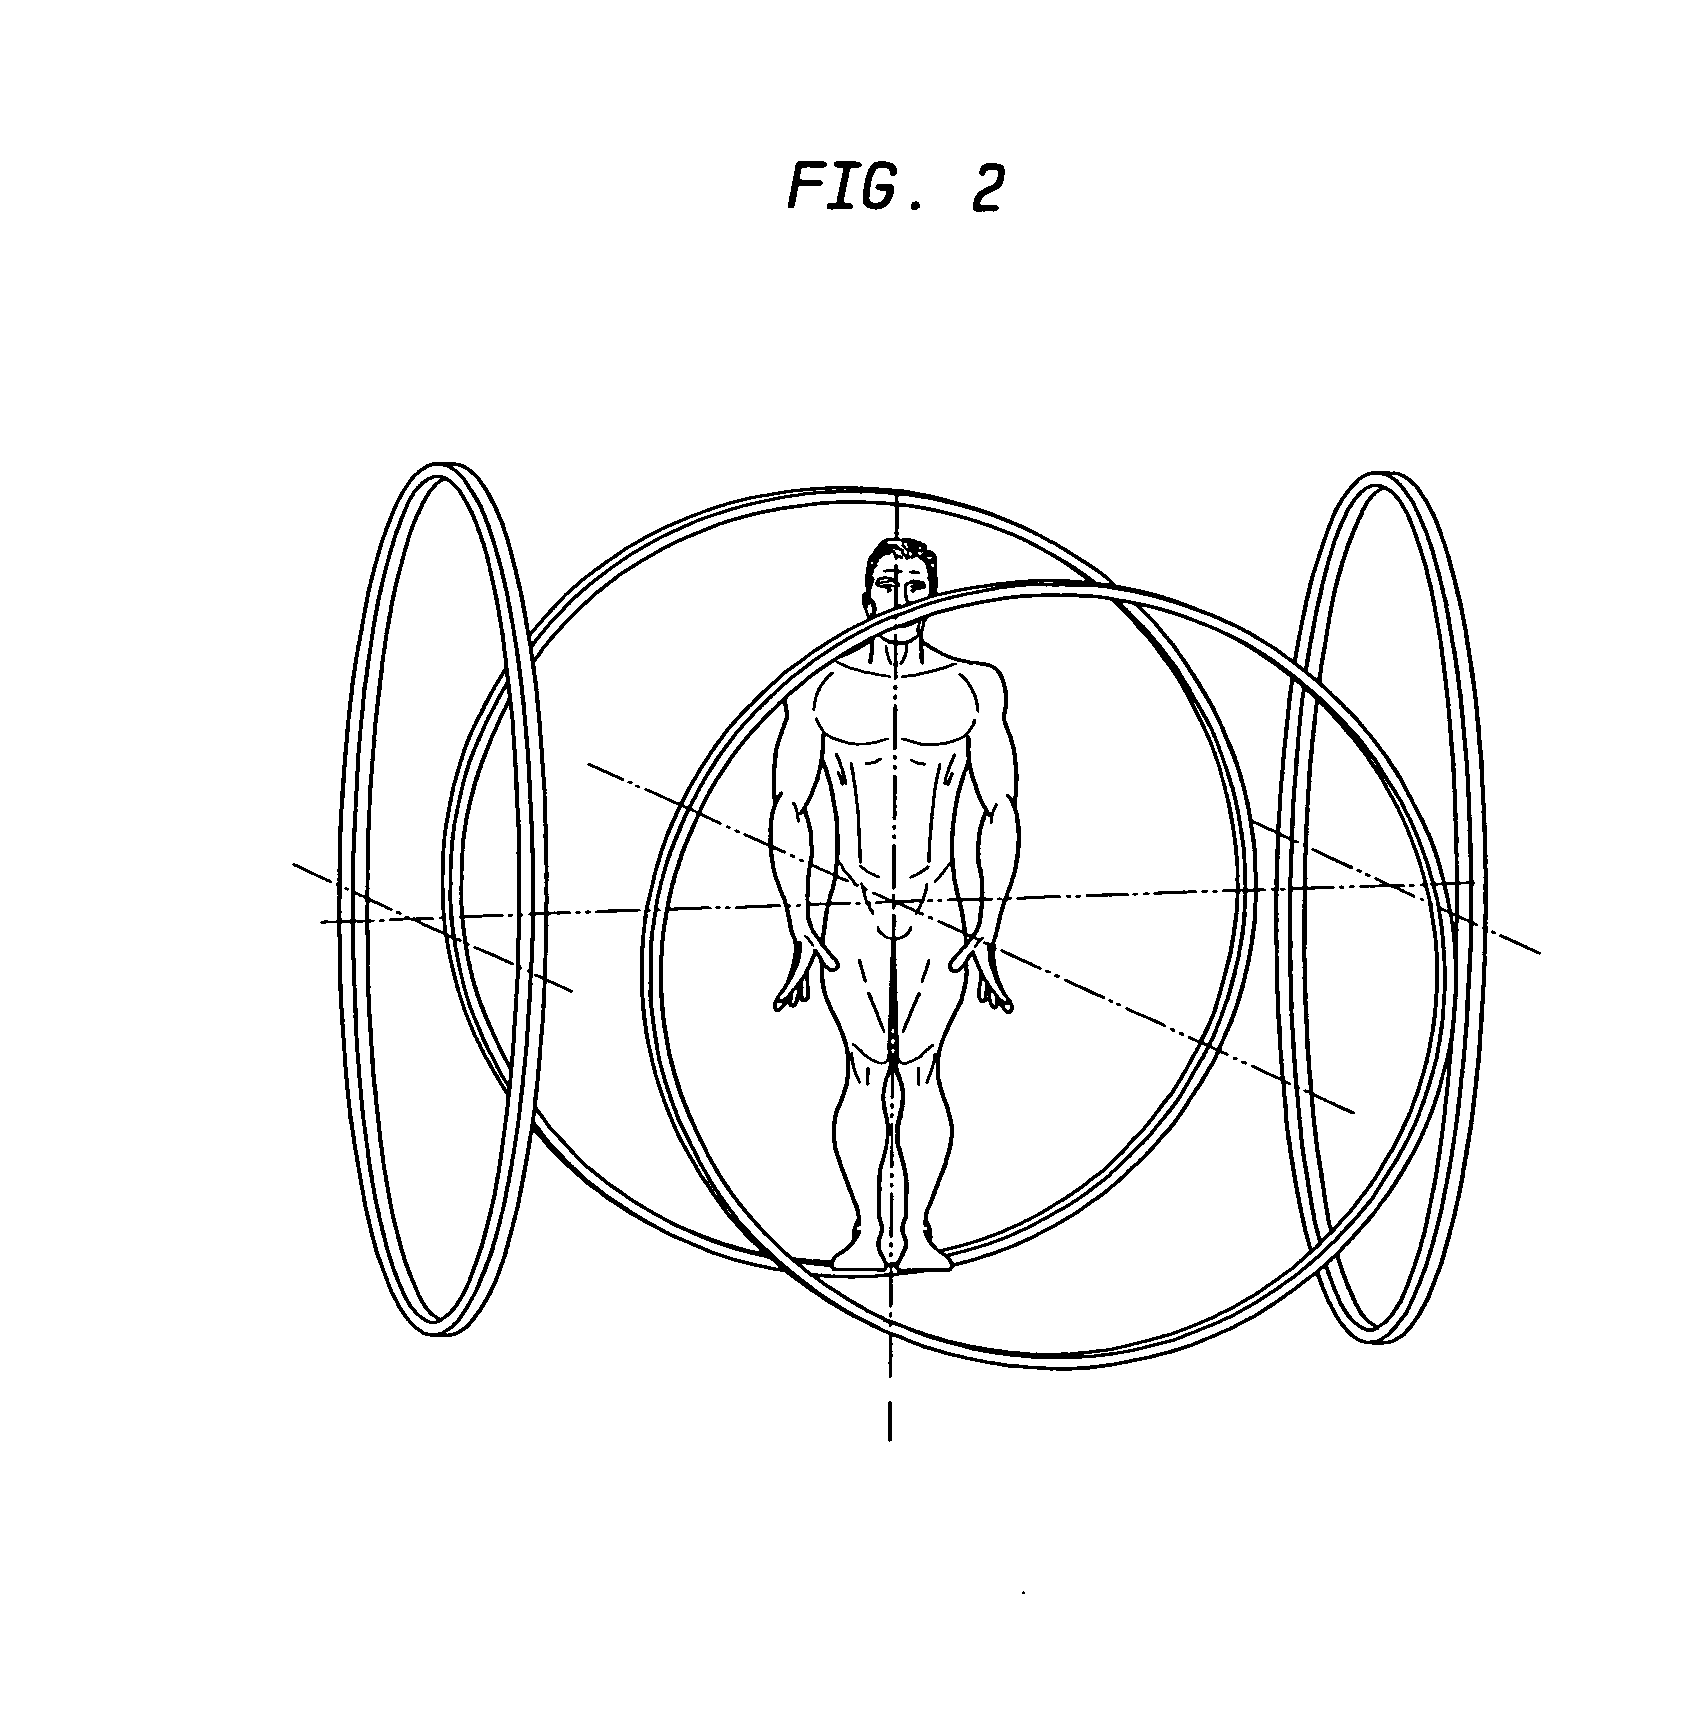 Method of using magnetic fields to uniformly induce electric fields for therapeutic purposes